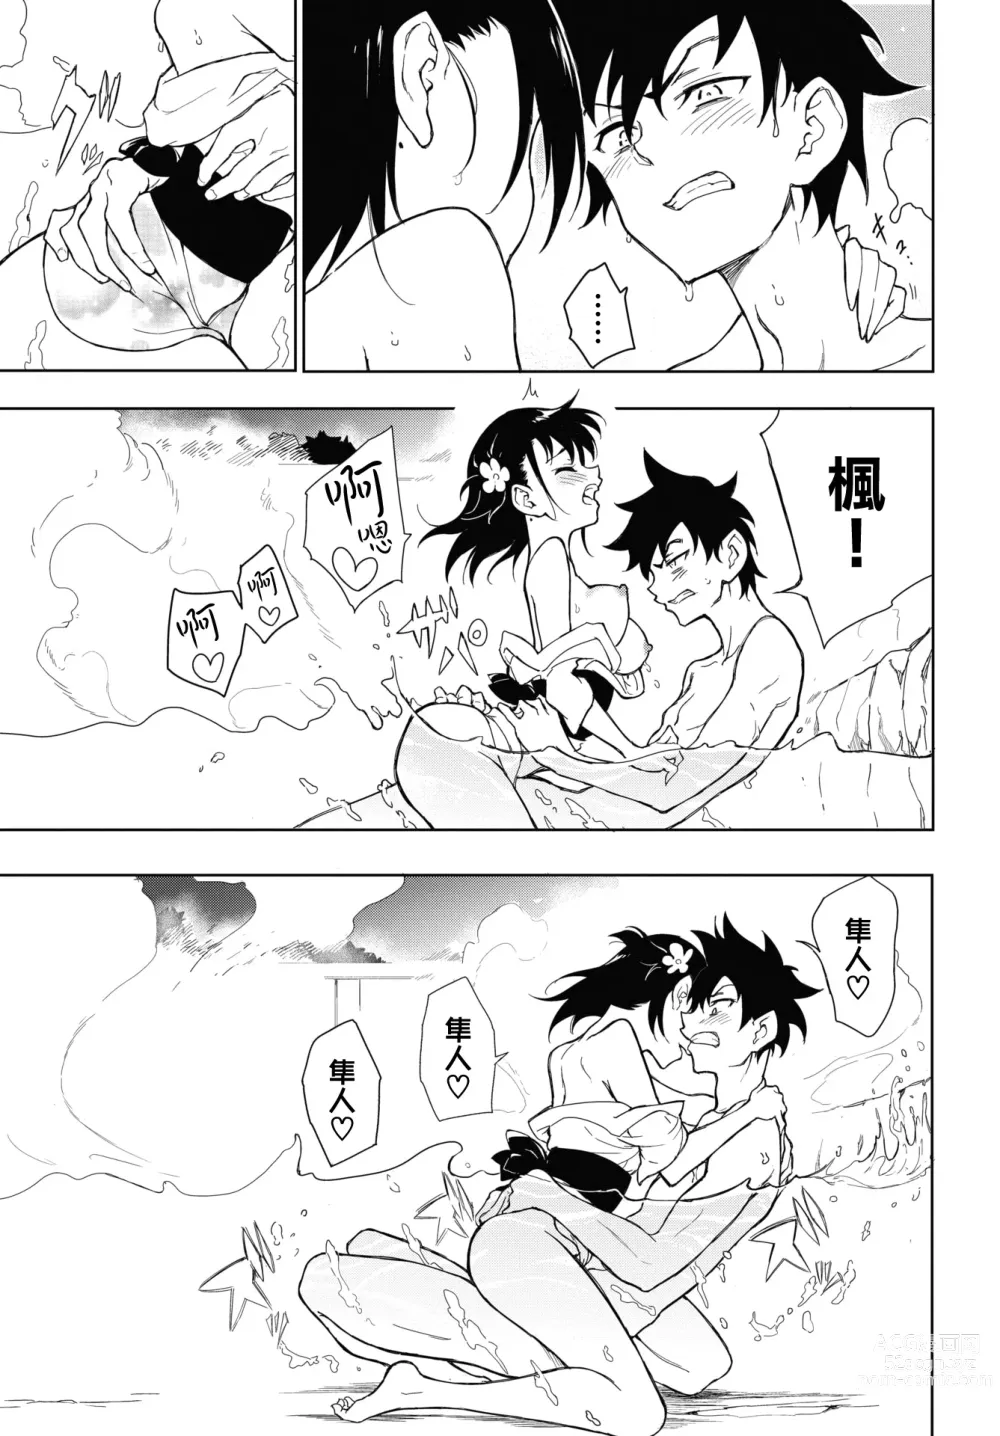 Page 170 of doujinshi 楓と鈴 1-7